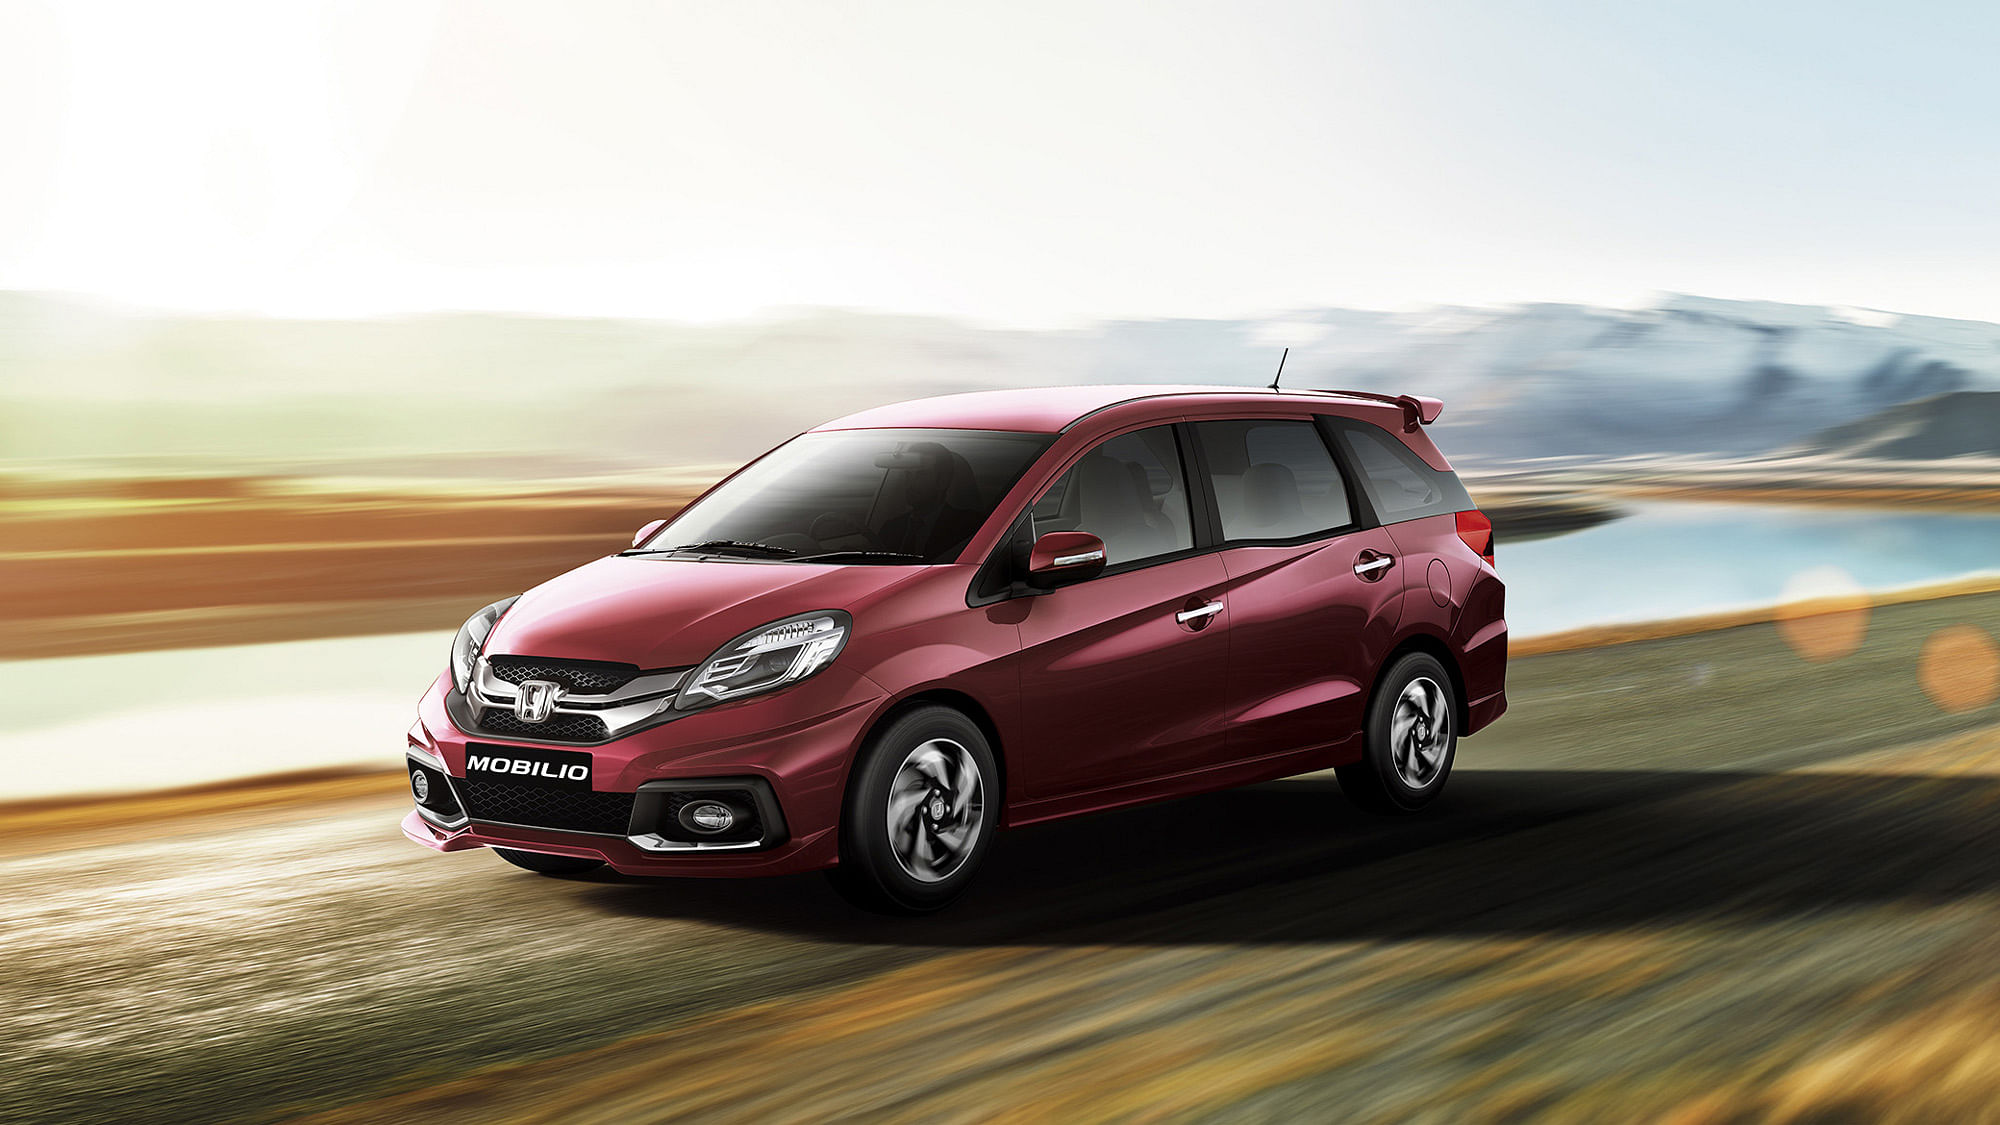  25,782 diesel variant units of Mobilio have been recalled by Honda. (Photo Courtesy: Honda India)